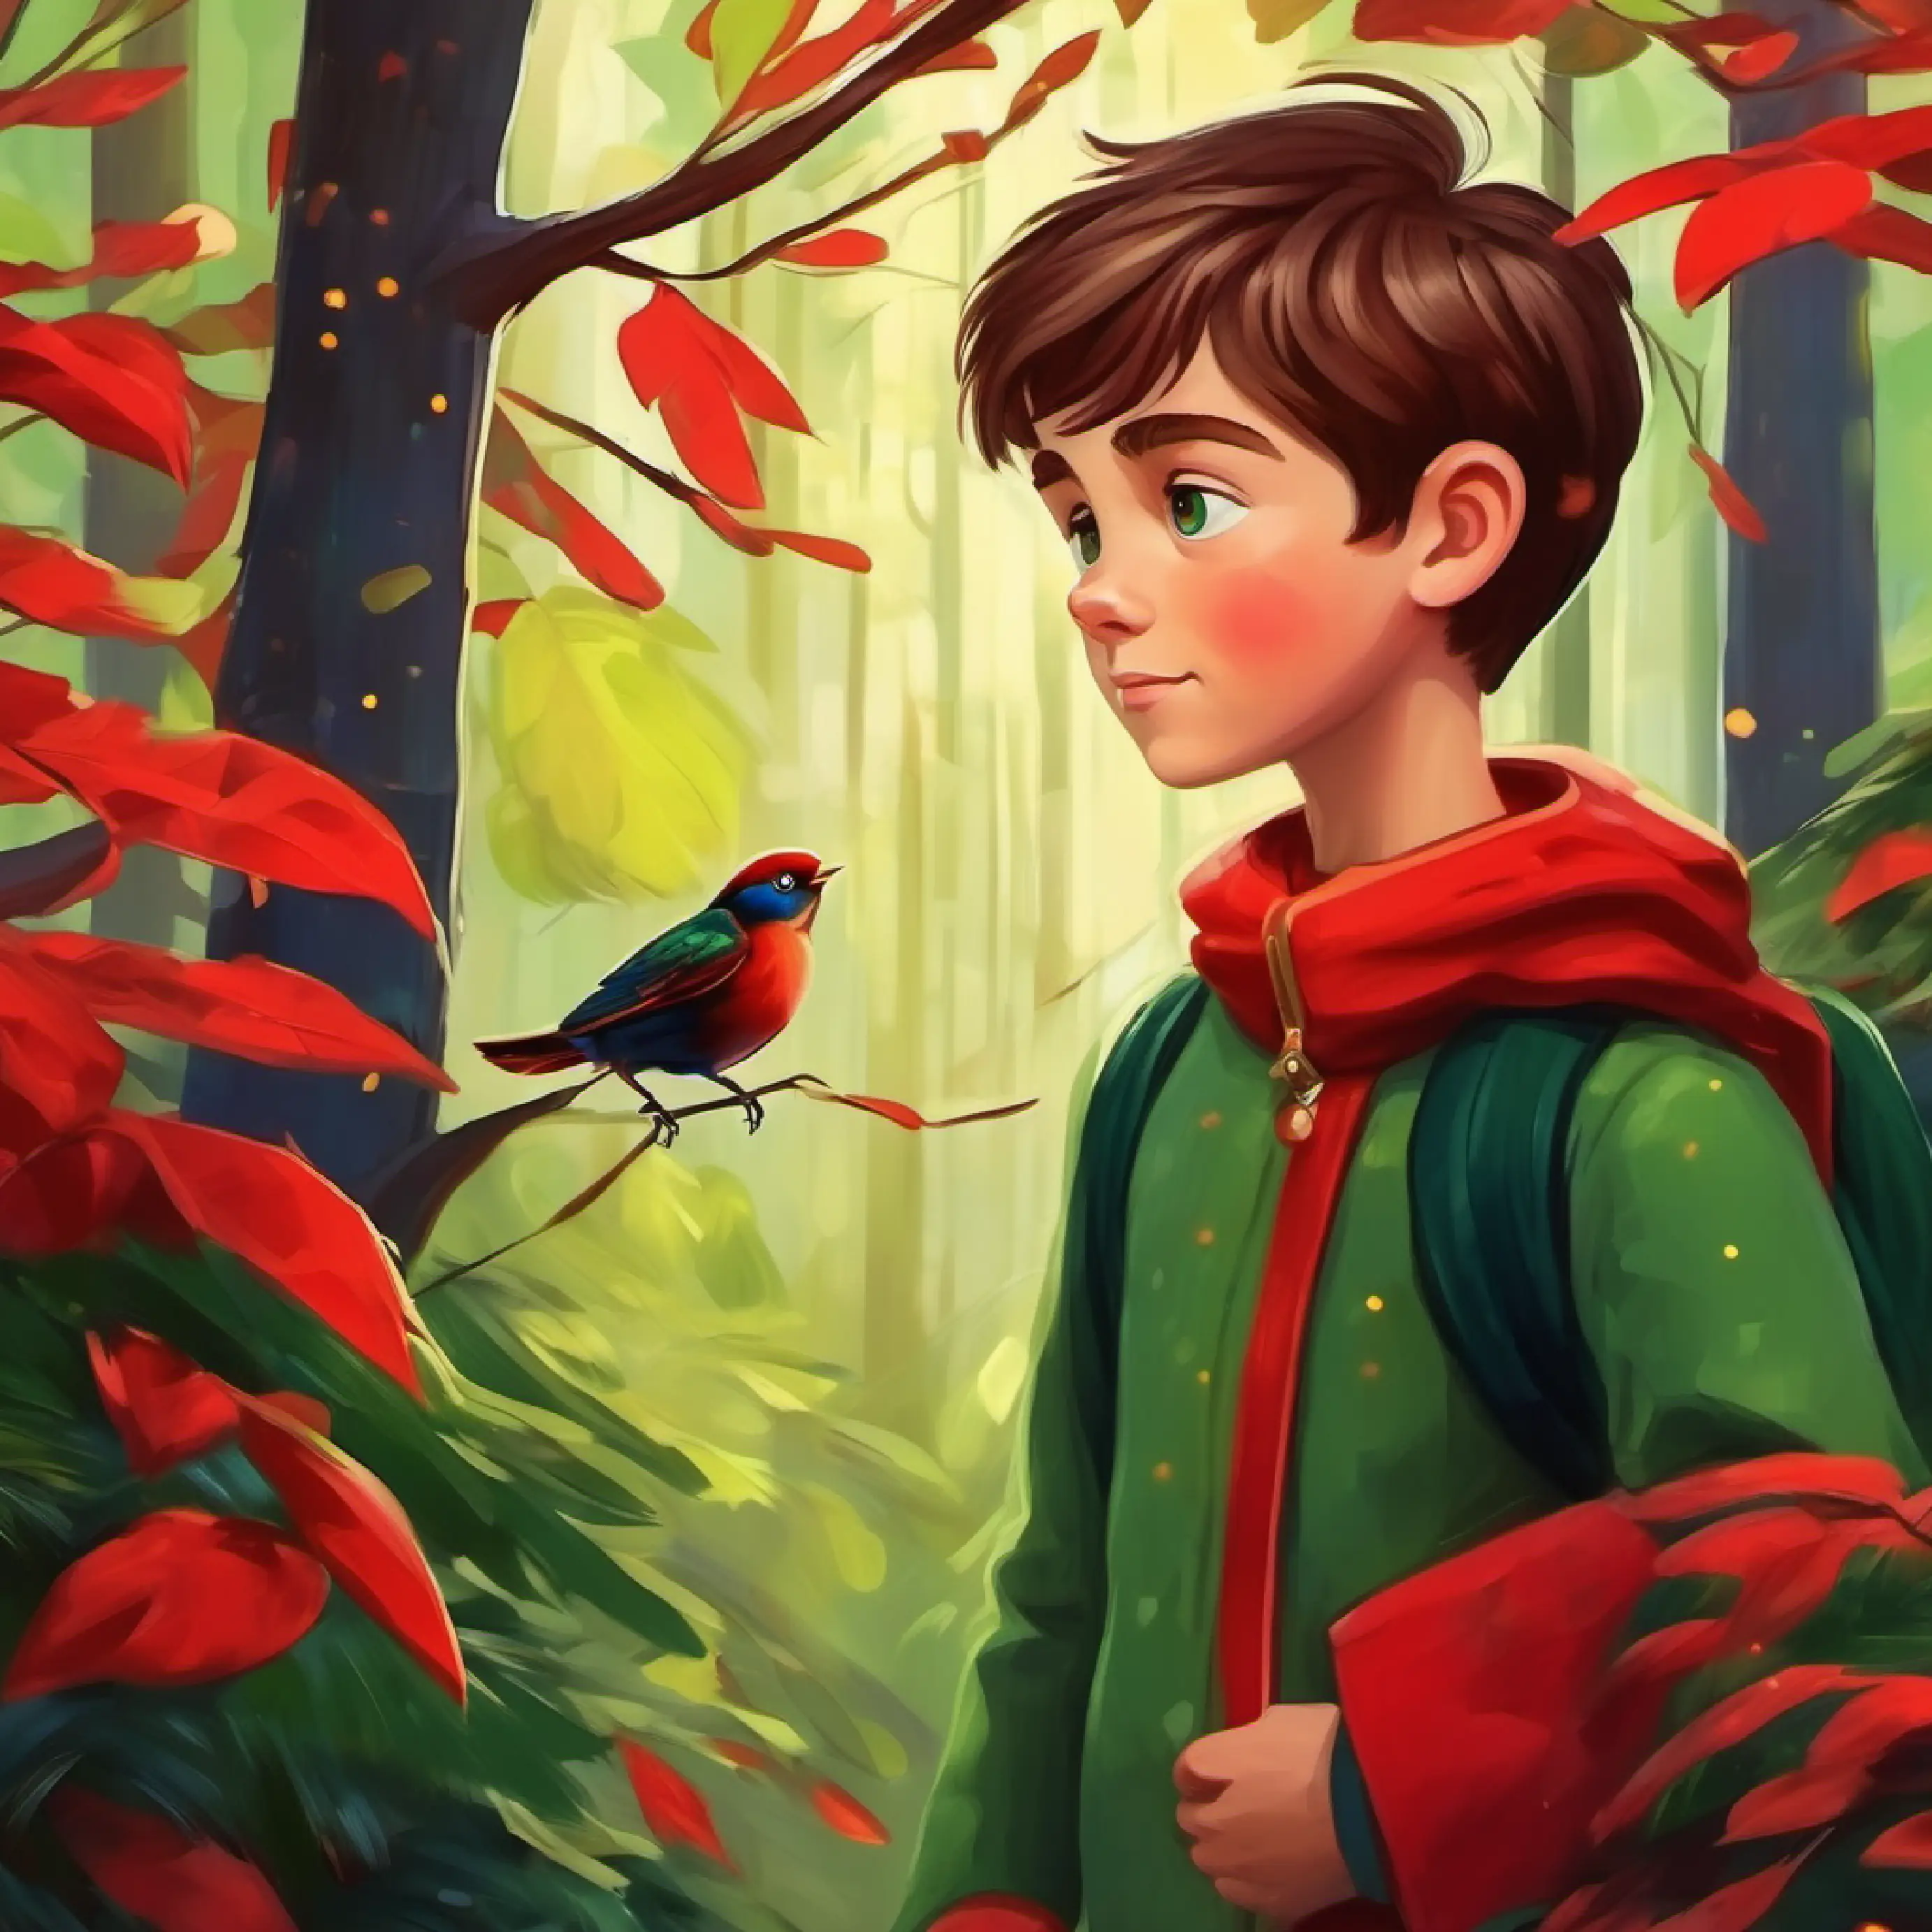 Young boy with brown hair, fair skin, and green eyes spots a red bird in the trees, beginning his adventures.